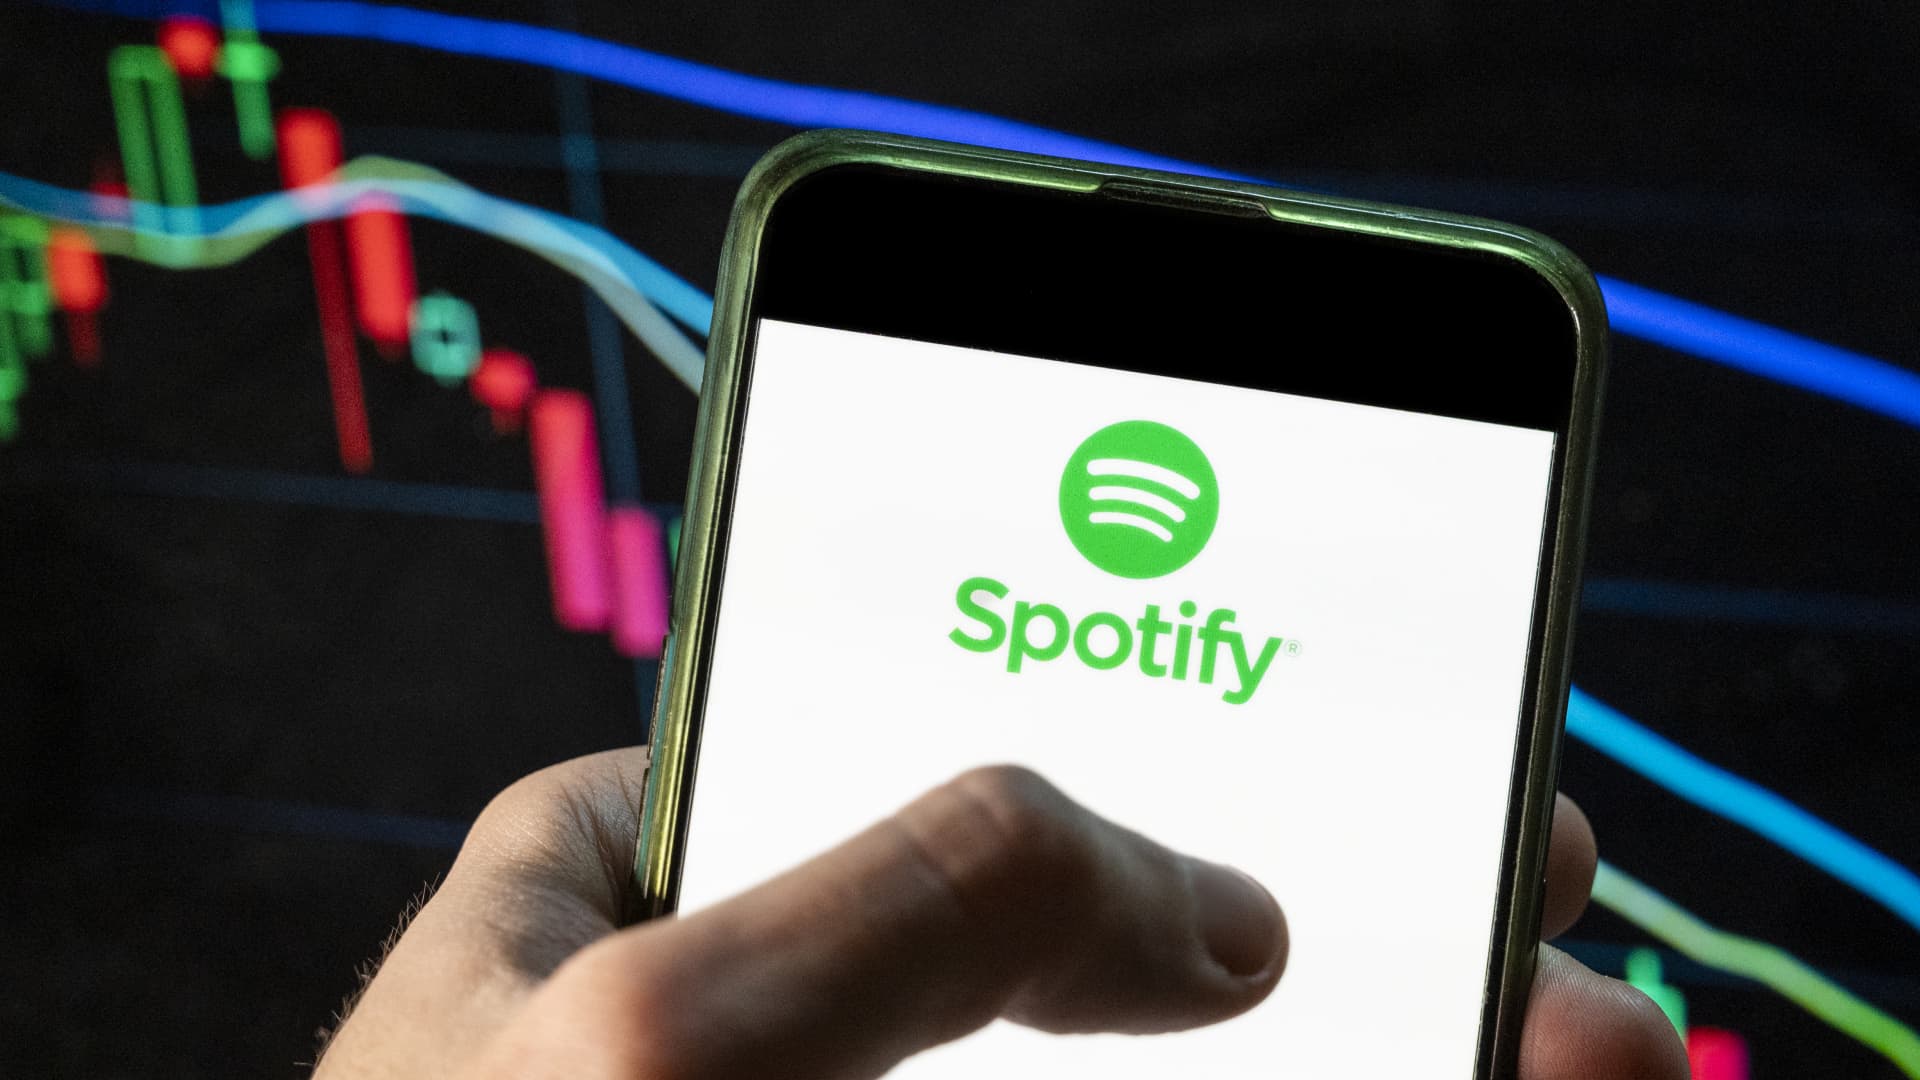 spotify-shares-dip-after-third-quarter-earnings-report